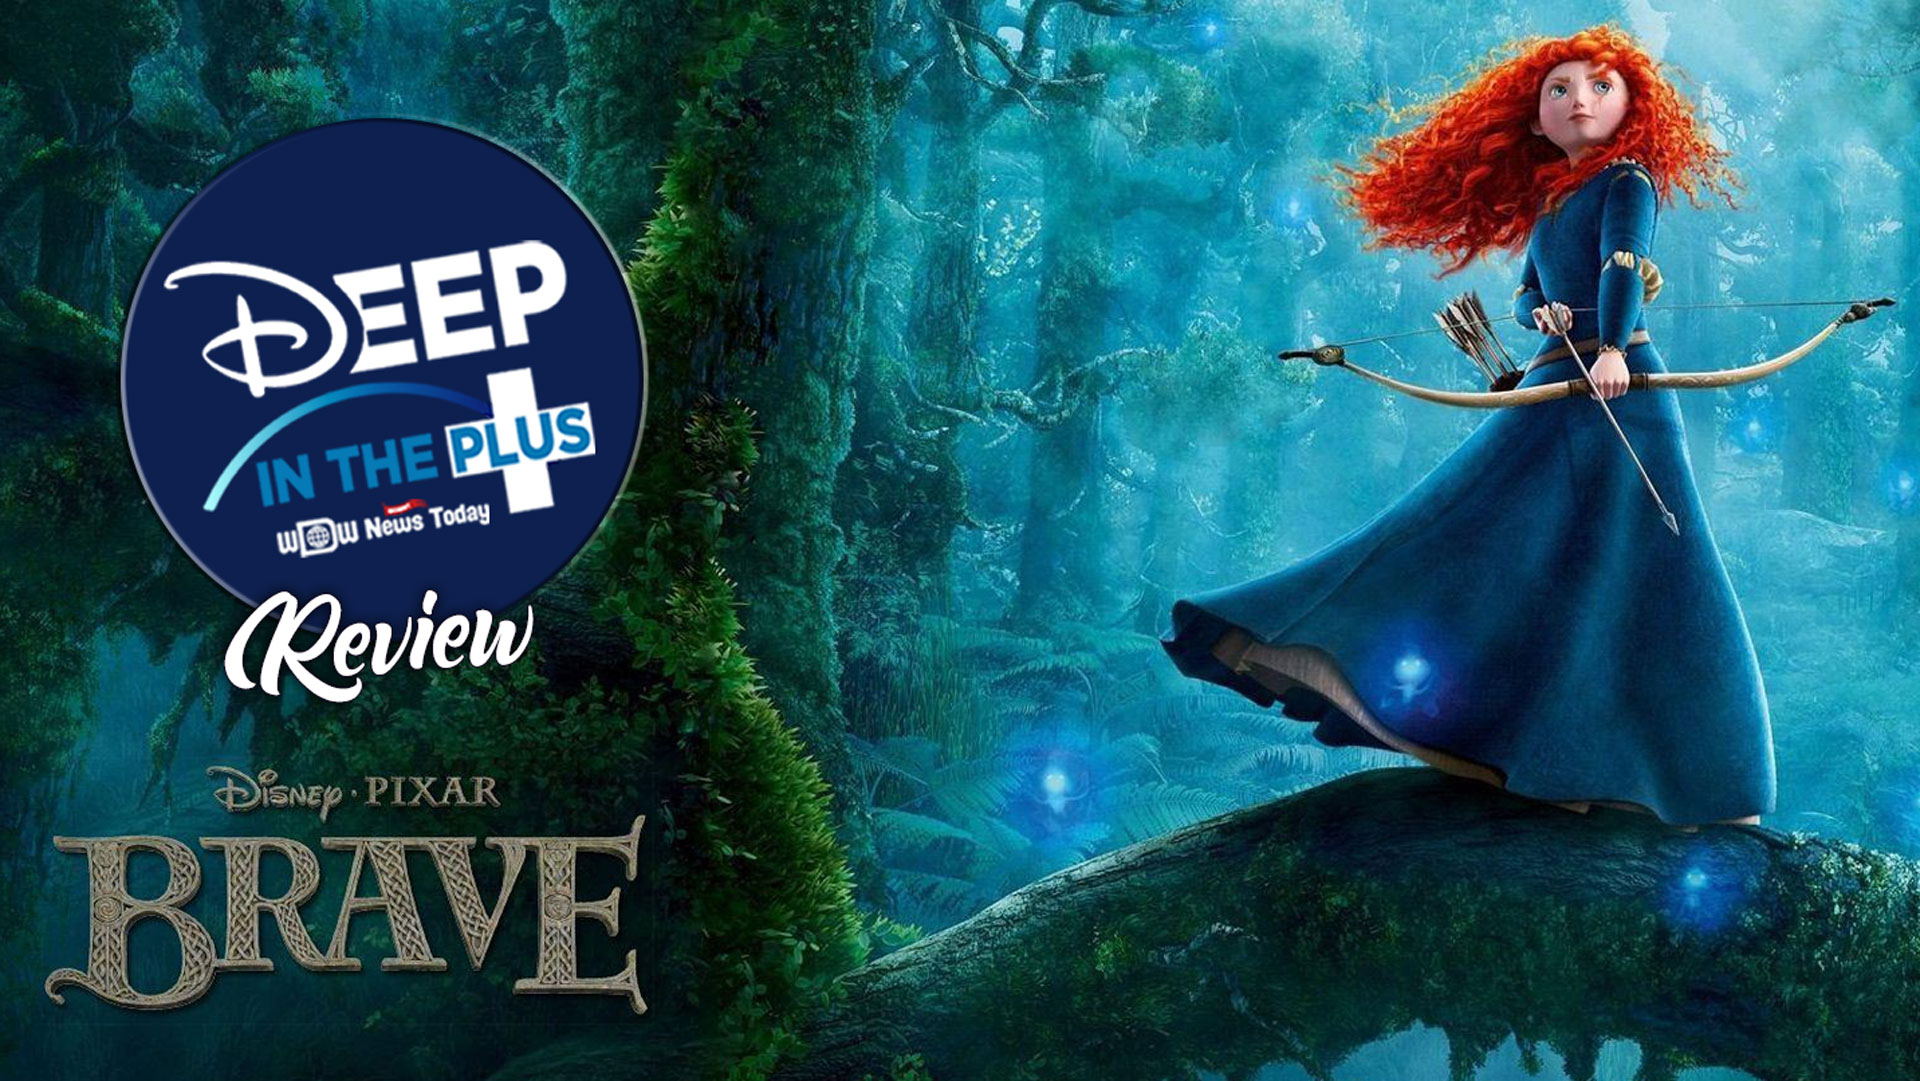 ben shneor recommends Brave Full Movie Free